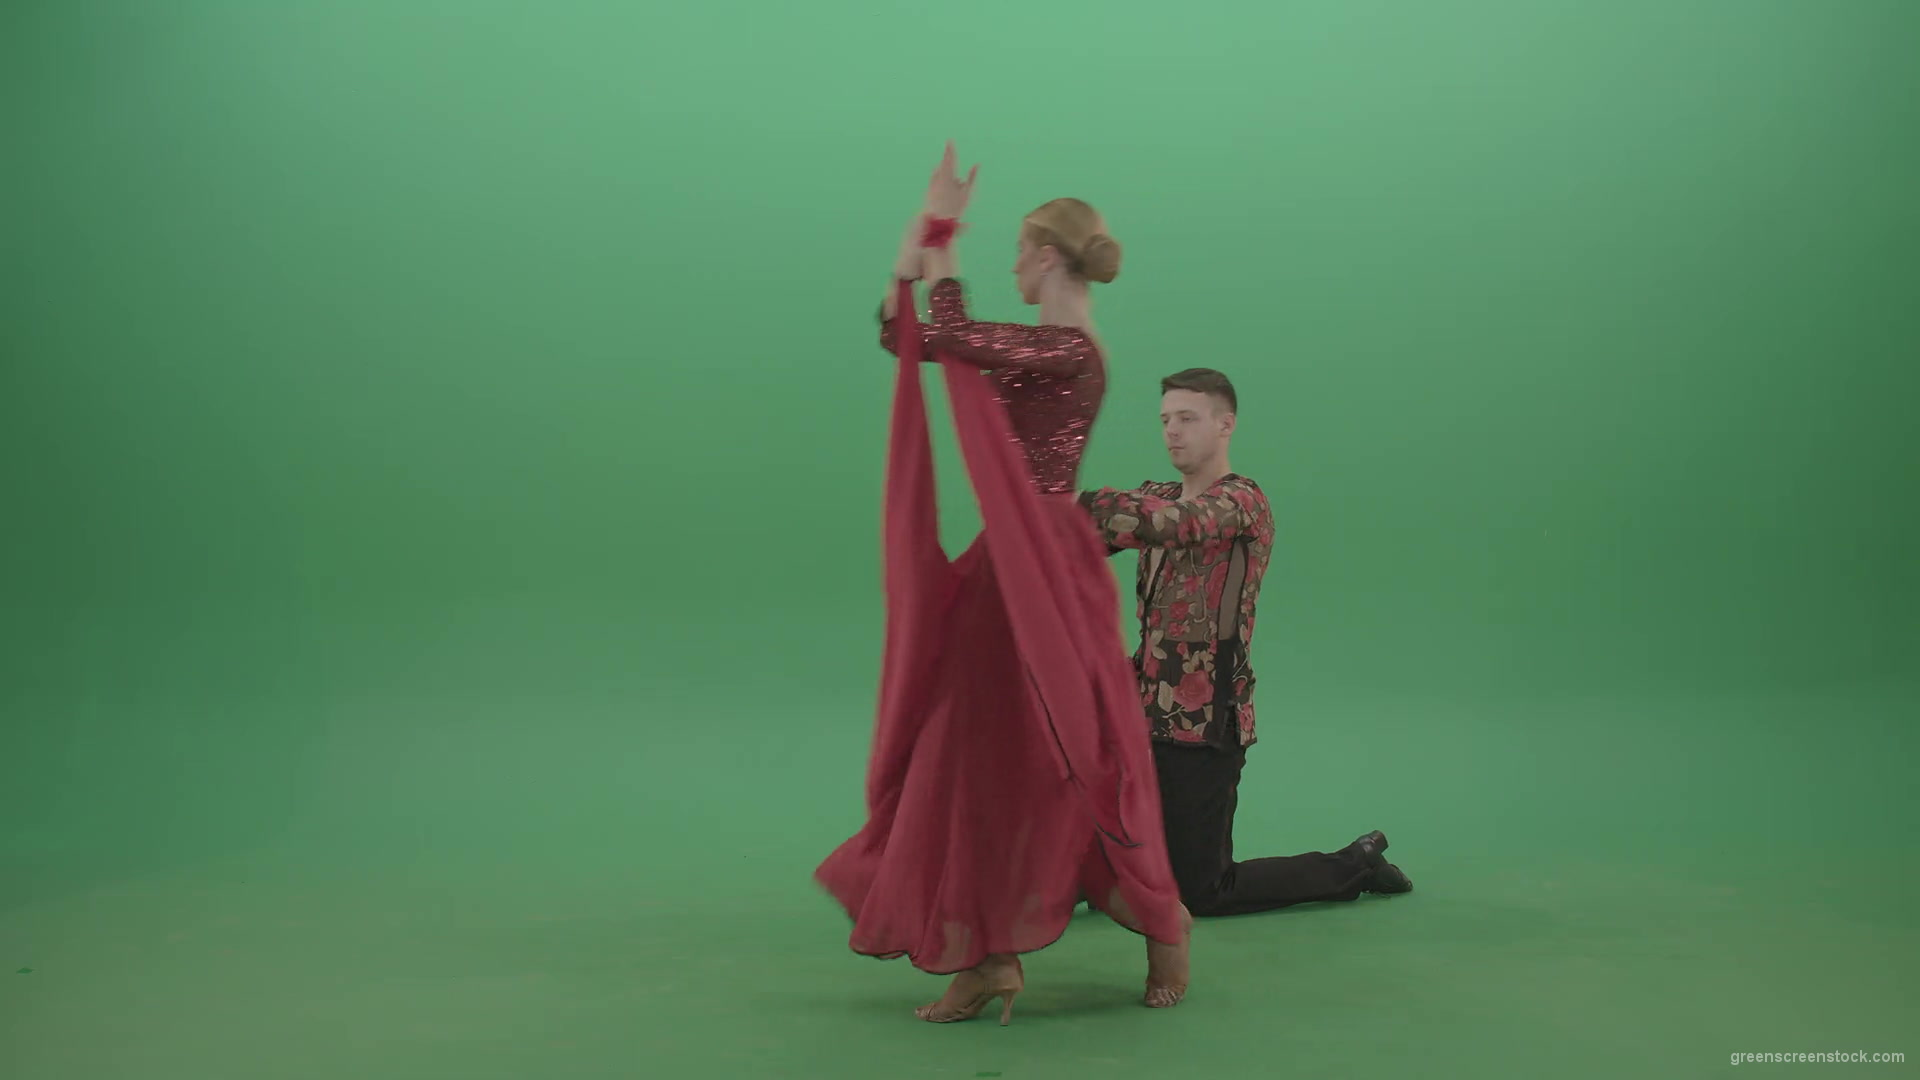 Passion-Couple-dancing-Rumba-Ballroom-dance-and-clapping-in-hands-isolated-on-green-screen-4K-Video-Footage-1920_004 Green Screen Stock